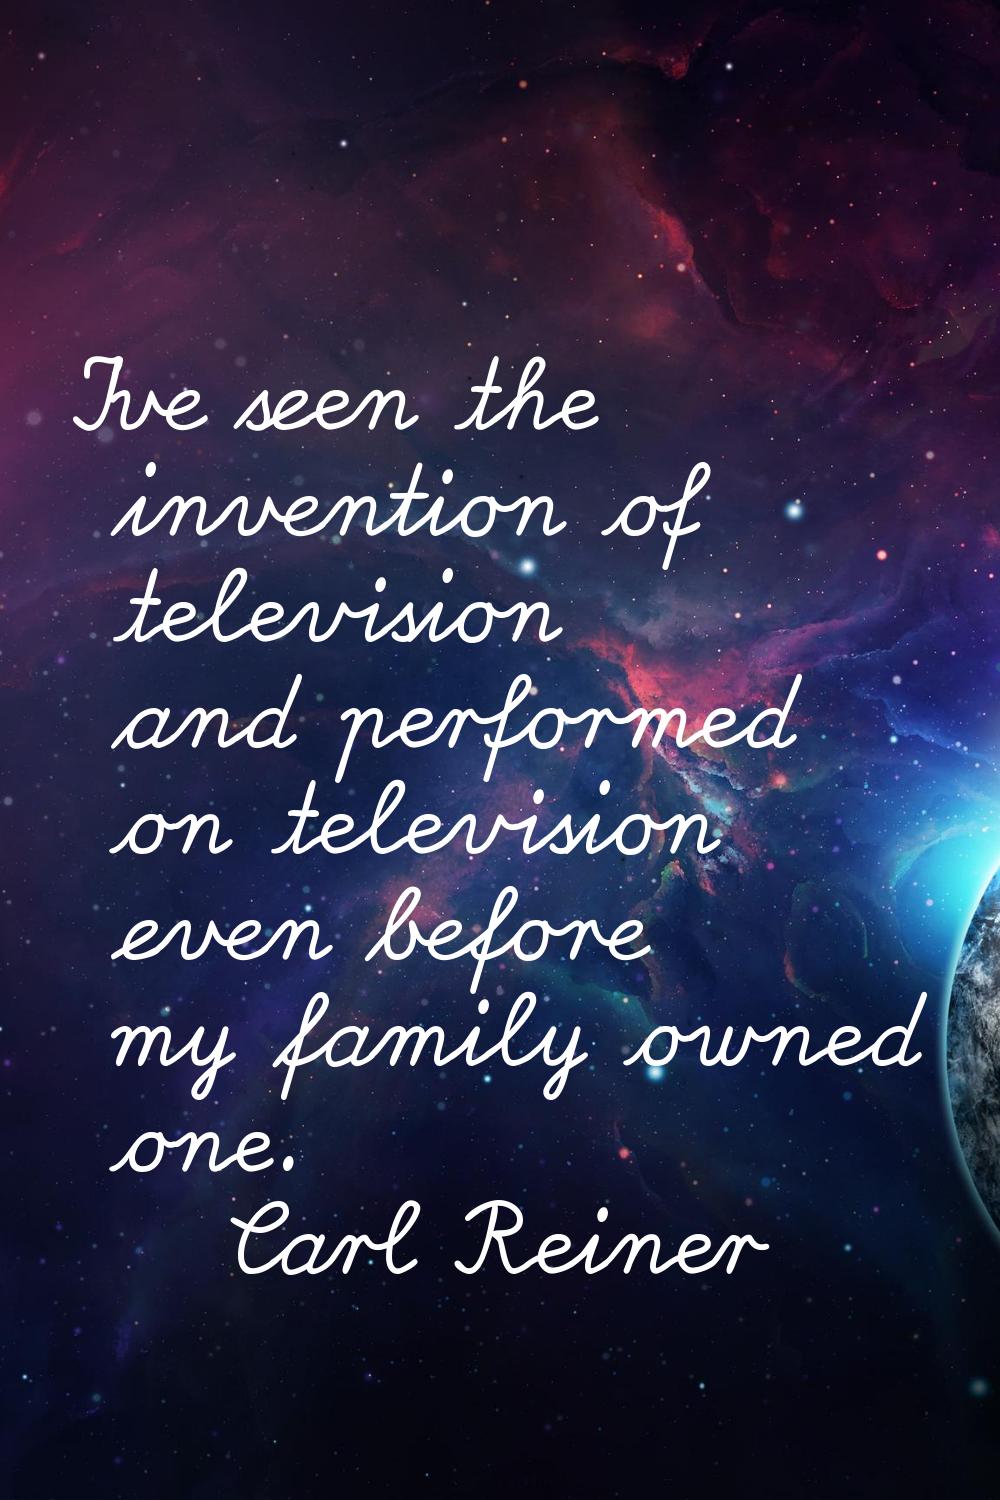 I've seen the invention of television and performed on television even before my family owned one.